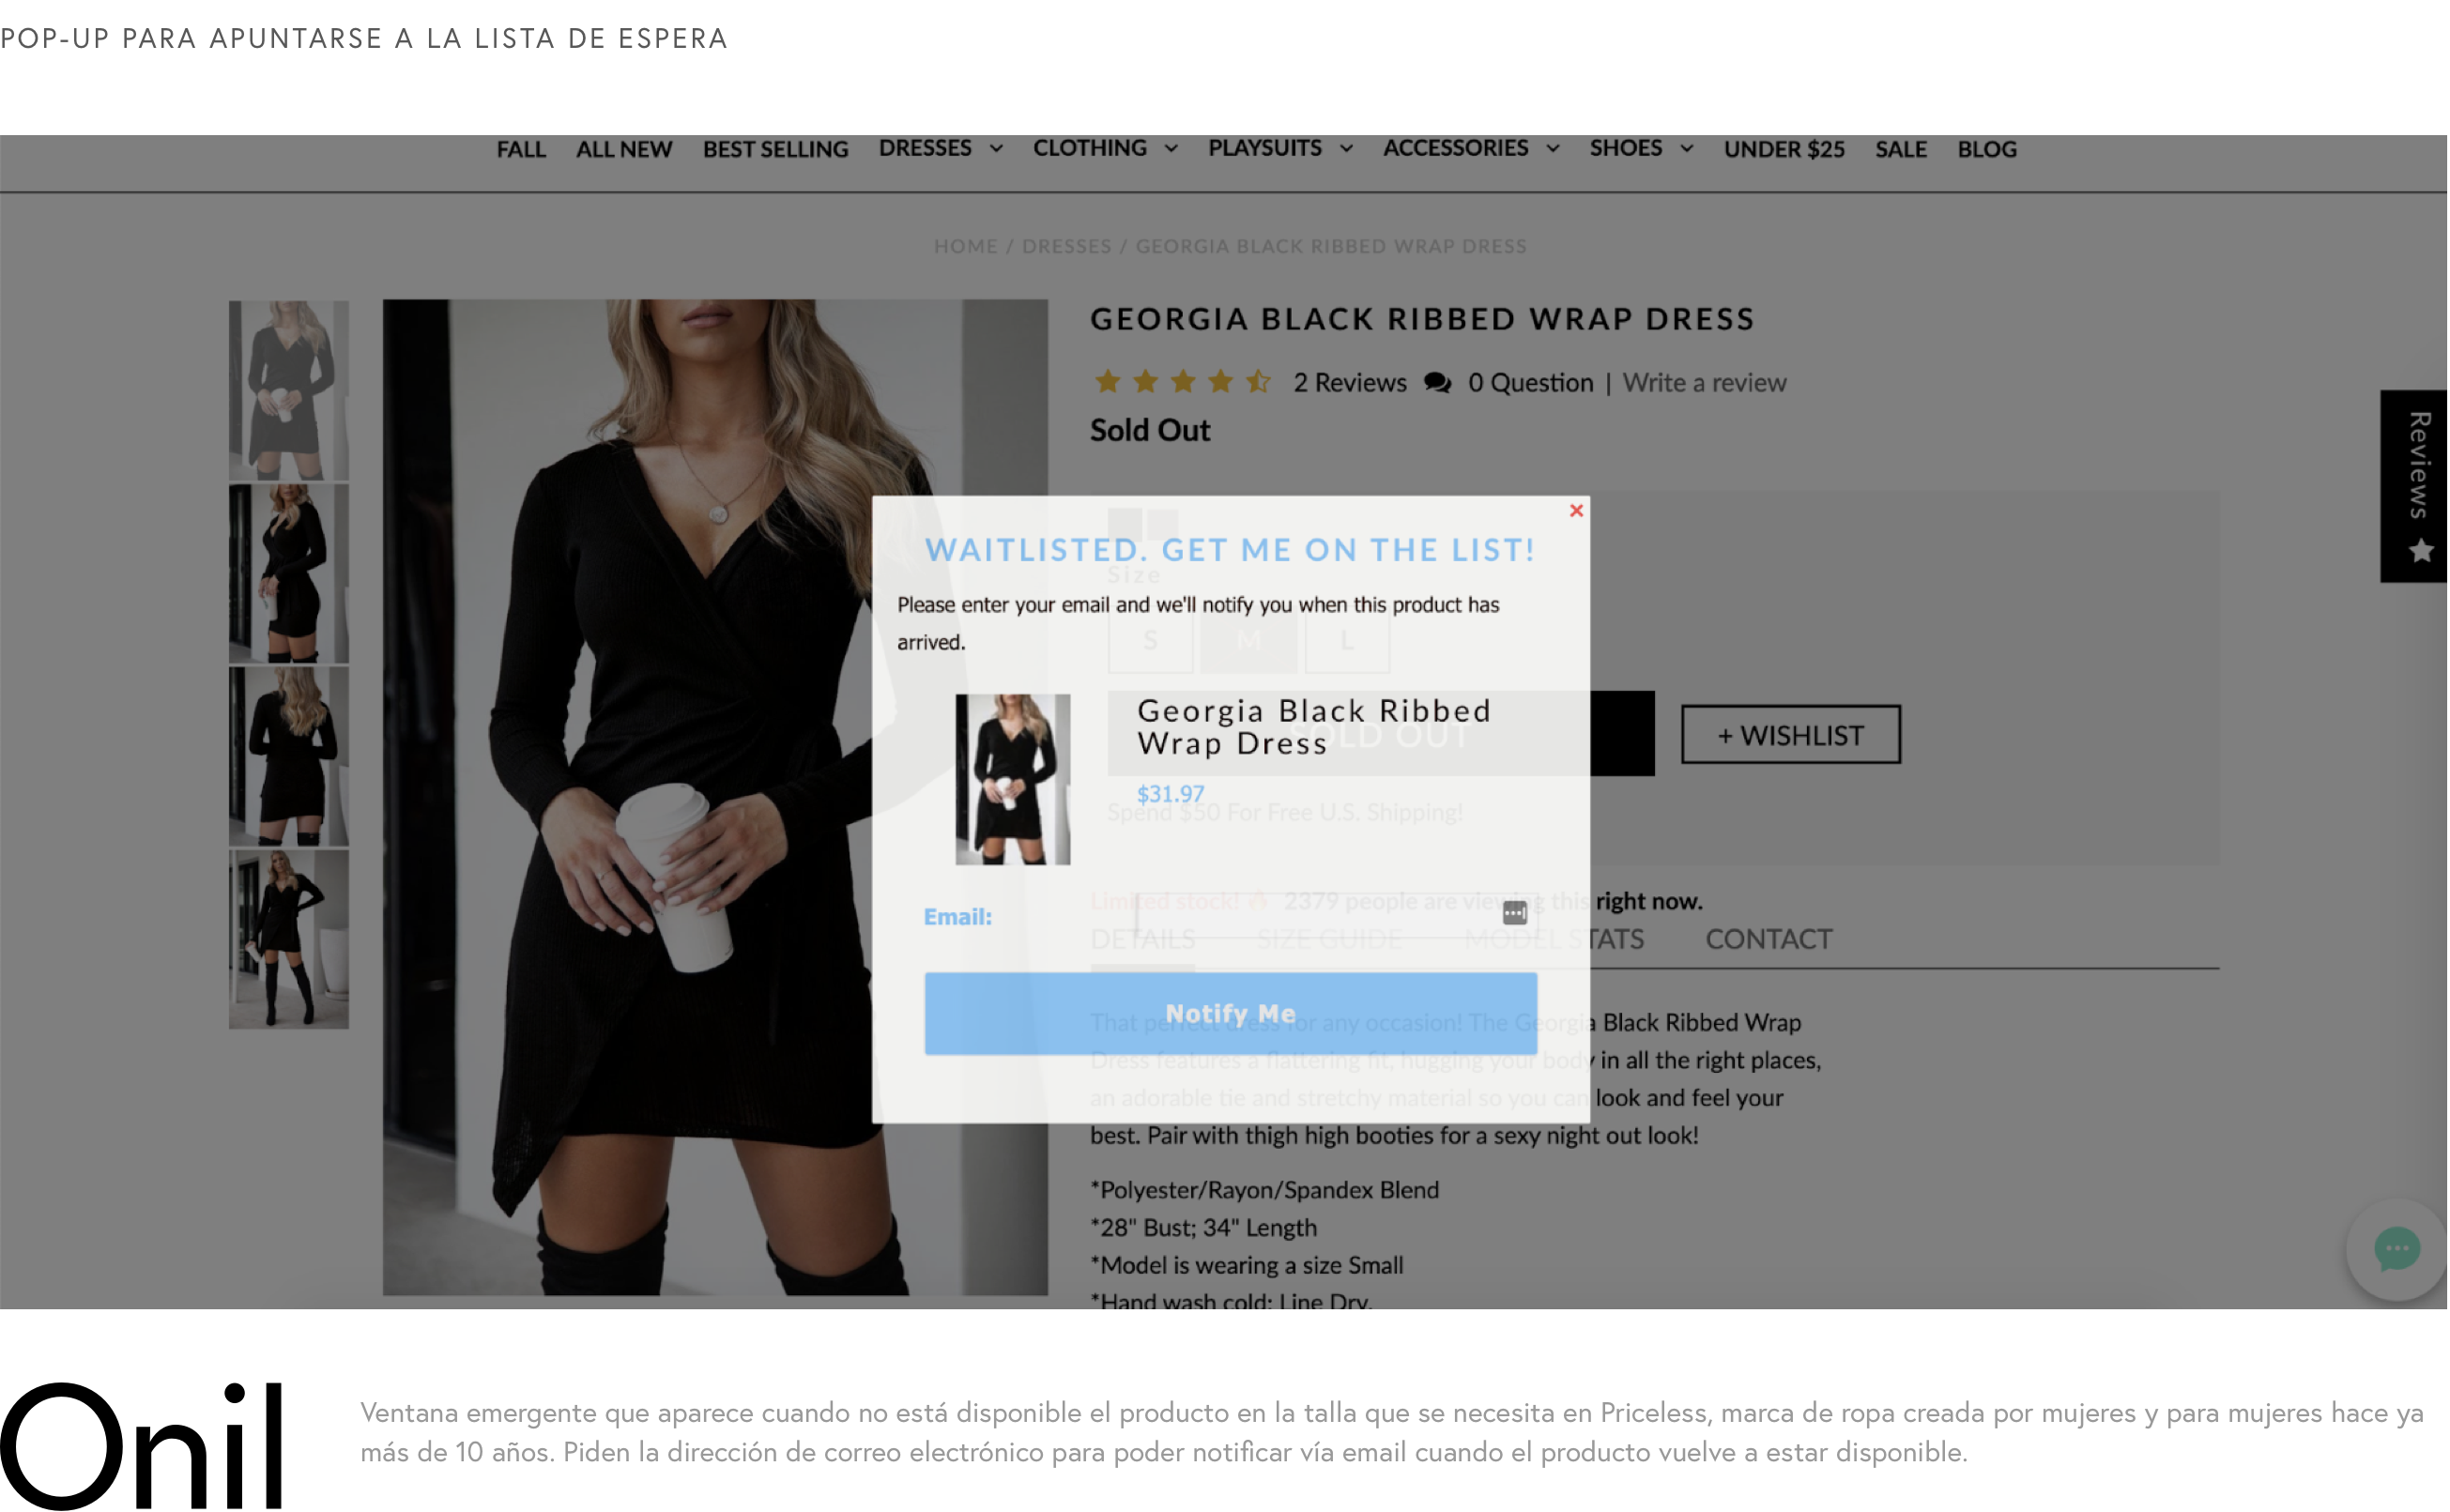 Pop-up to sign up for the waiting list - Pop-up window that appears when the product in the size you need is not available at Priceless.